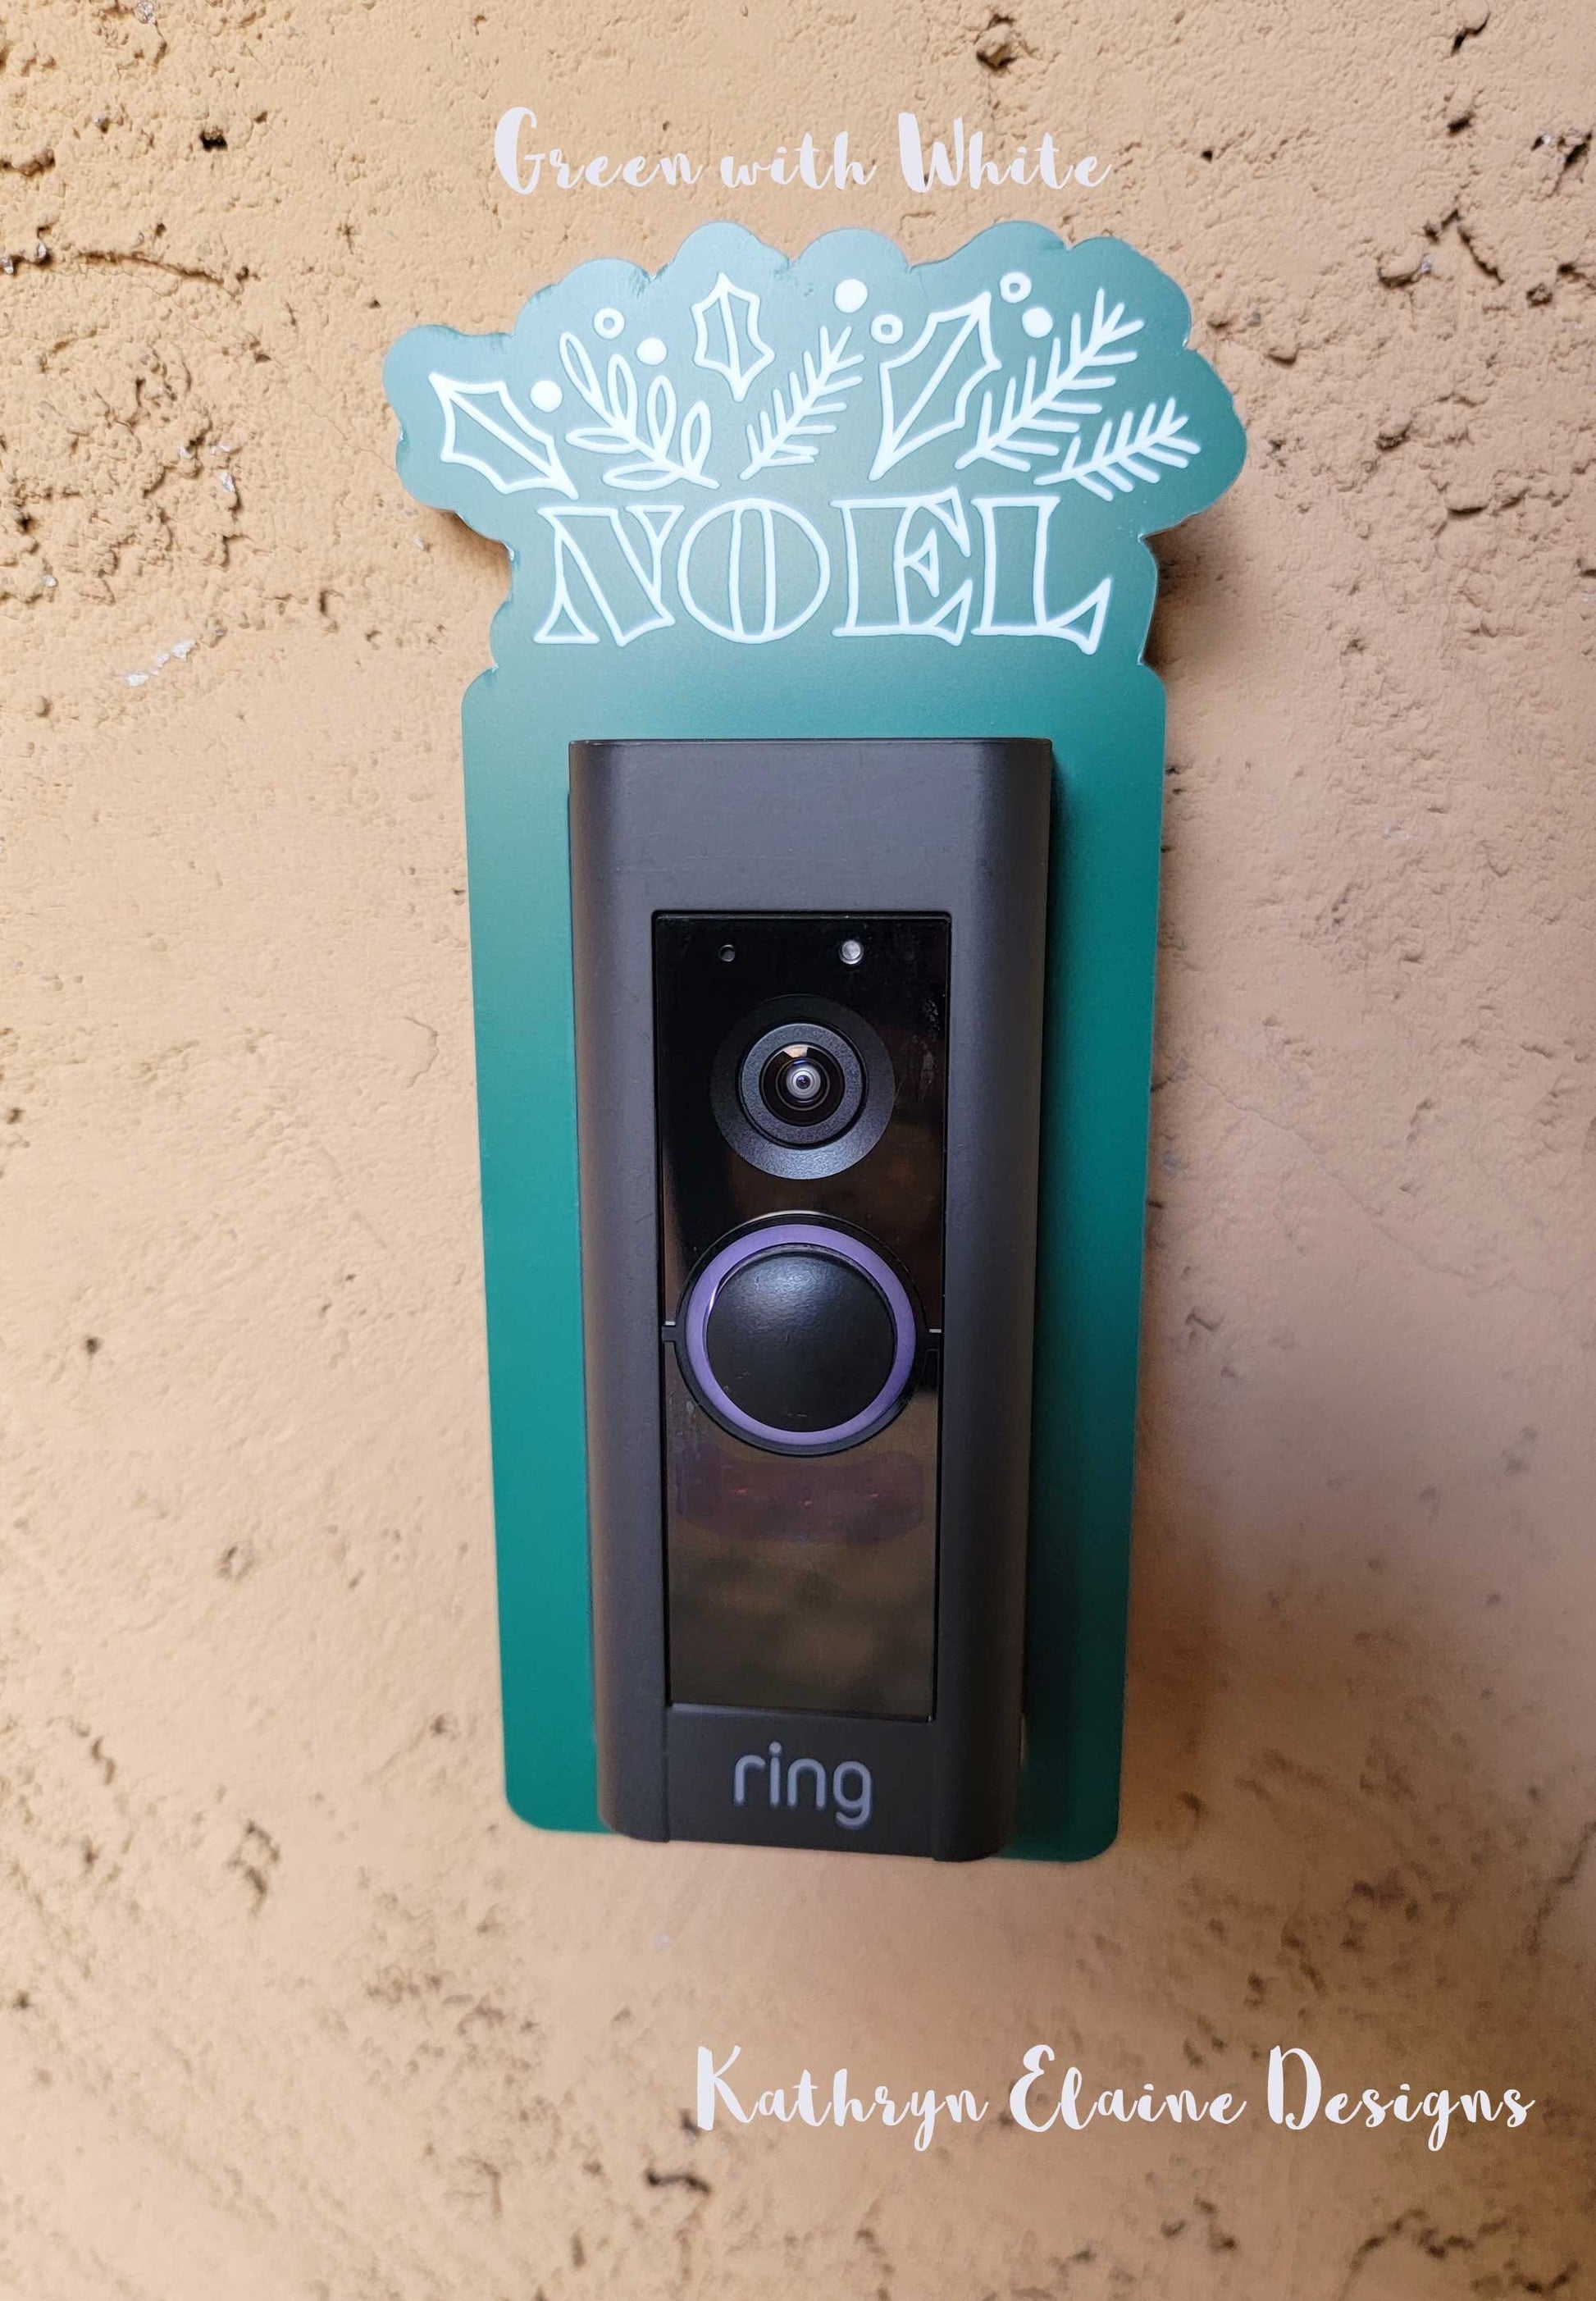 Green laminate doorbell surround with white lettering saying Noel and holly, leaf design around ring doorbell on tan background.